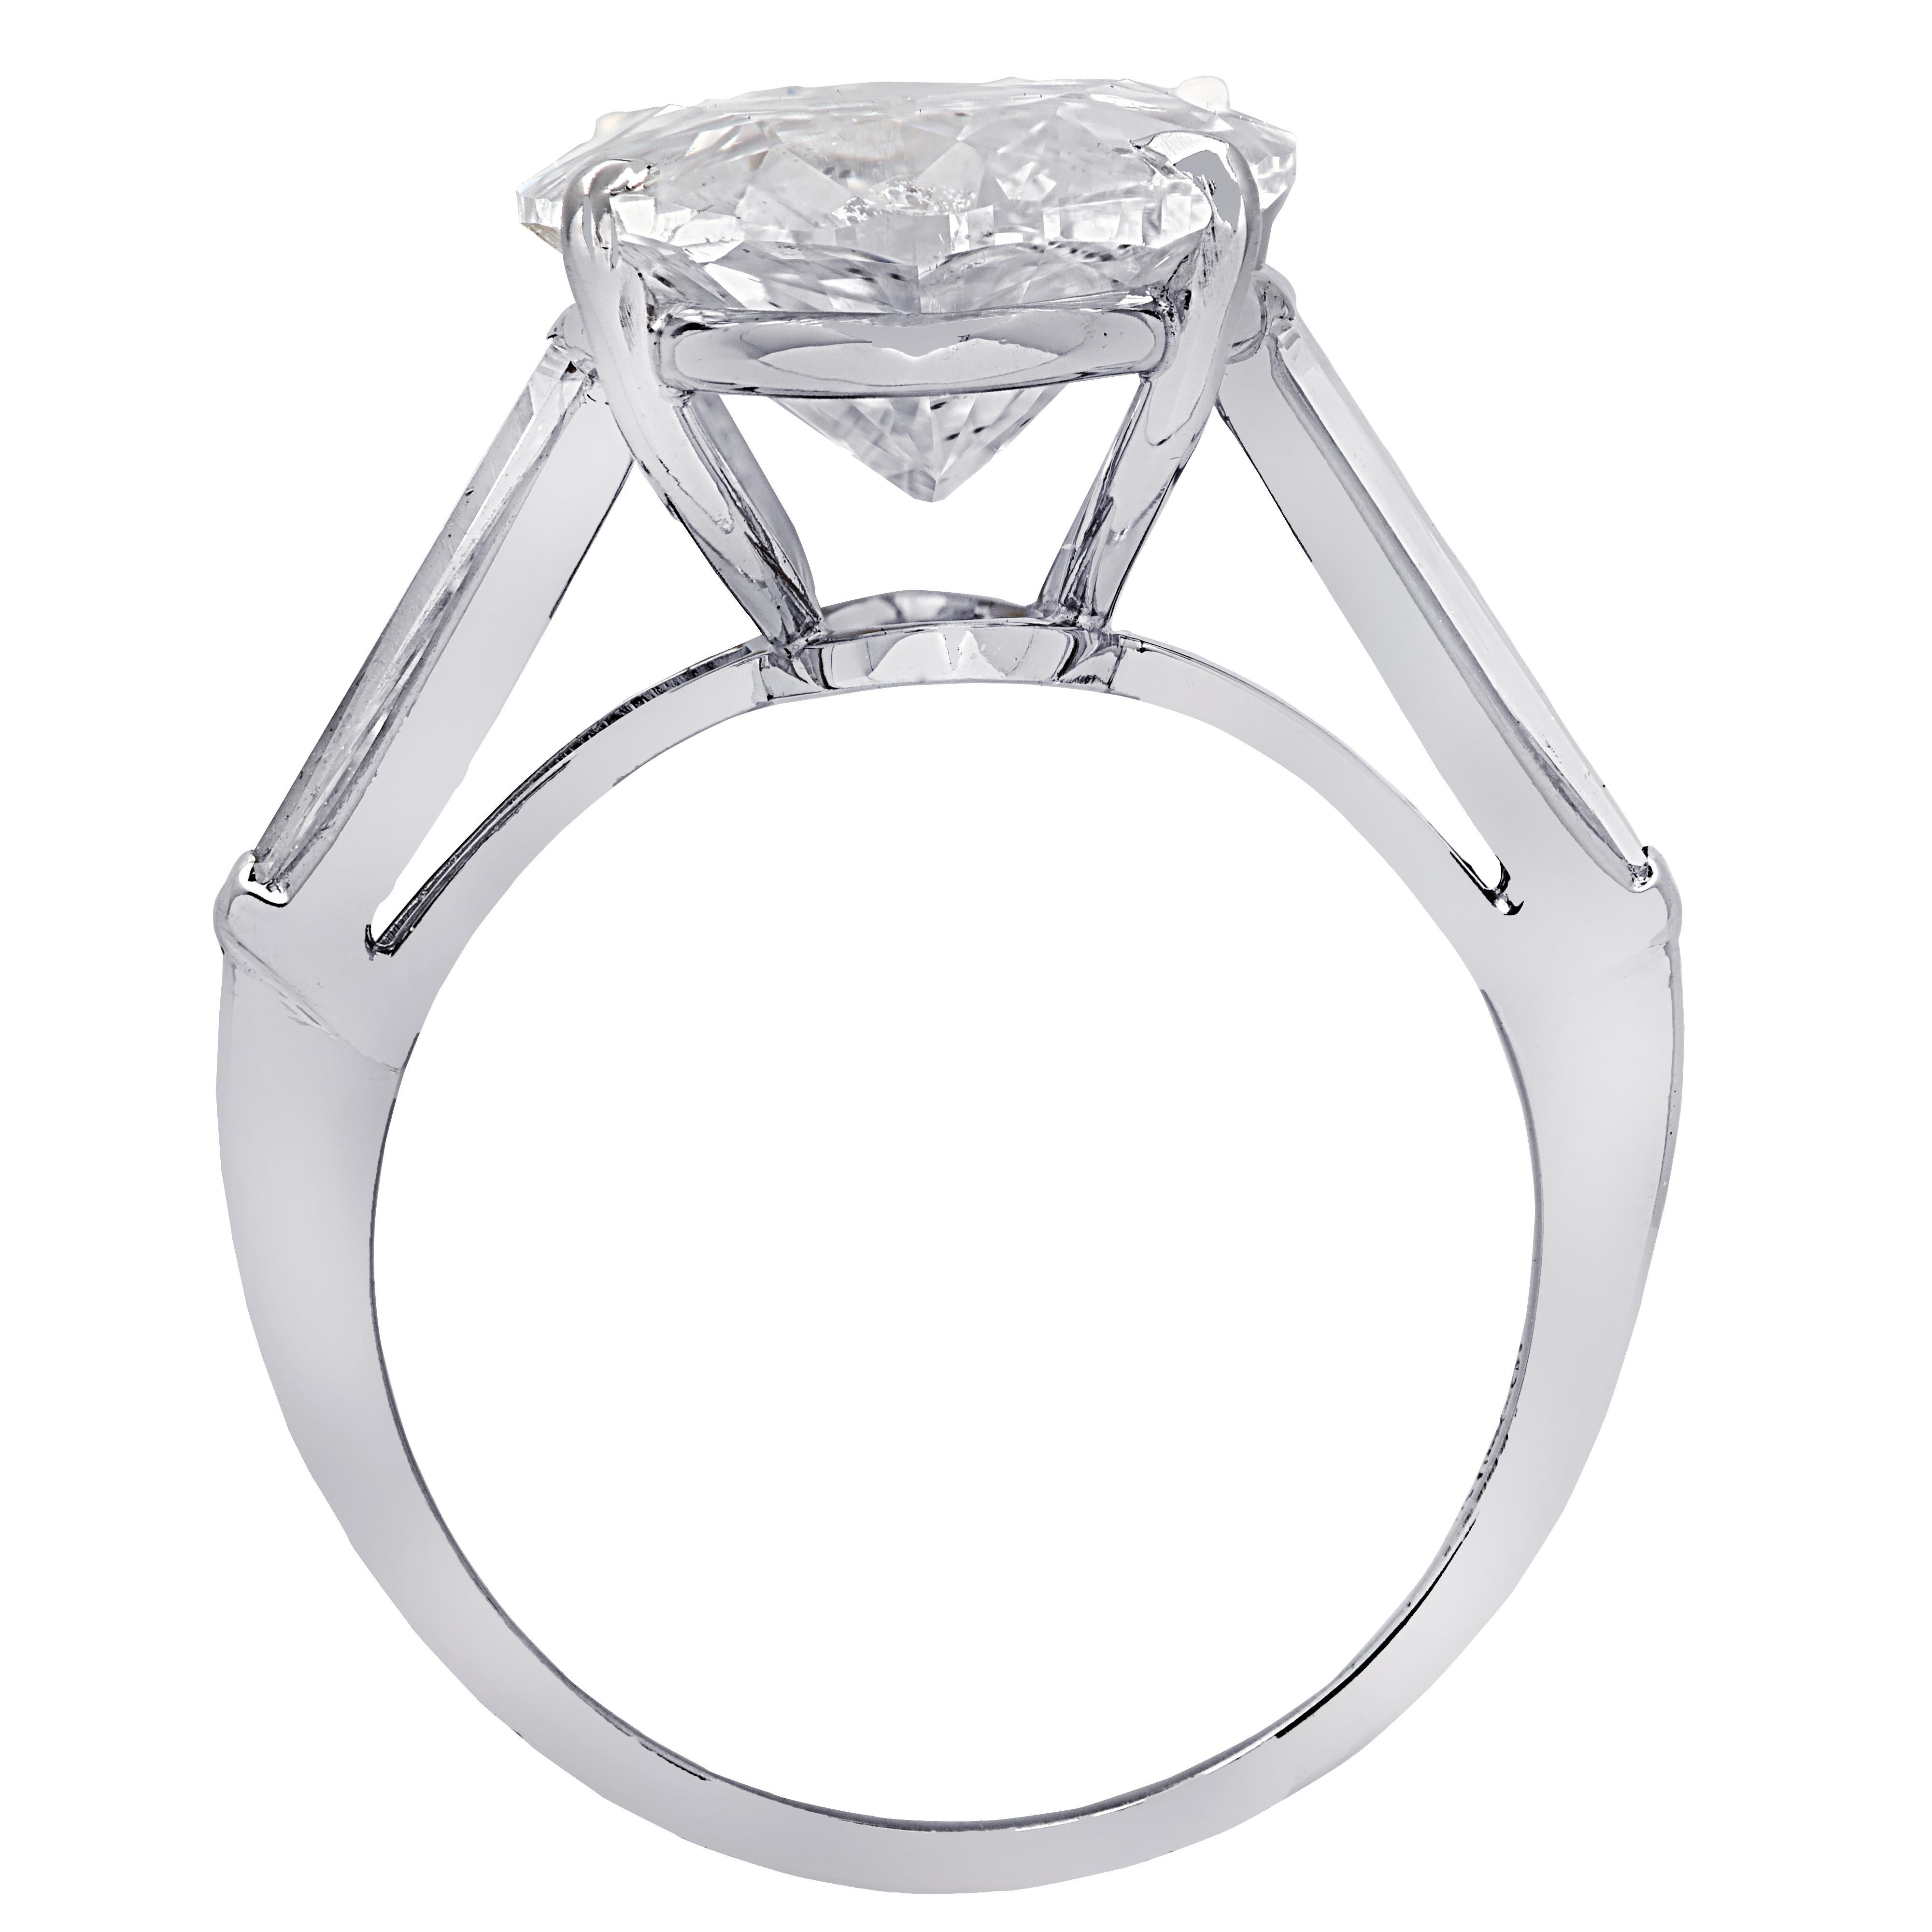 Exquisite Vivid Diamonds engagement ring crafted in platinum, showcasing a sensational moval cut diamond weighing 10.14 carats, D color, I1 clarity, accompanied by 2 carefully selected and perfectly matched tapered baguettes weighing approximately 1